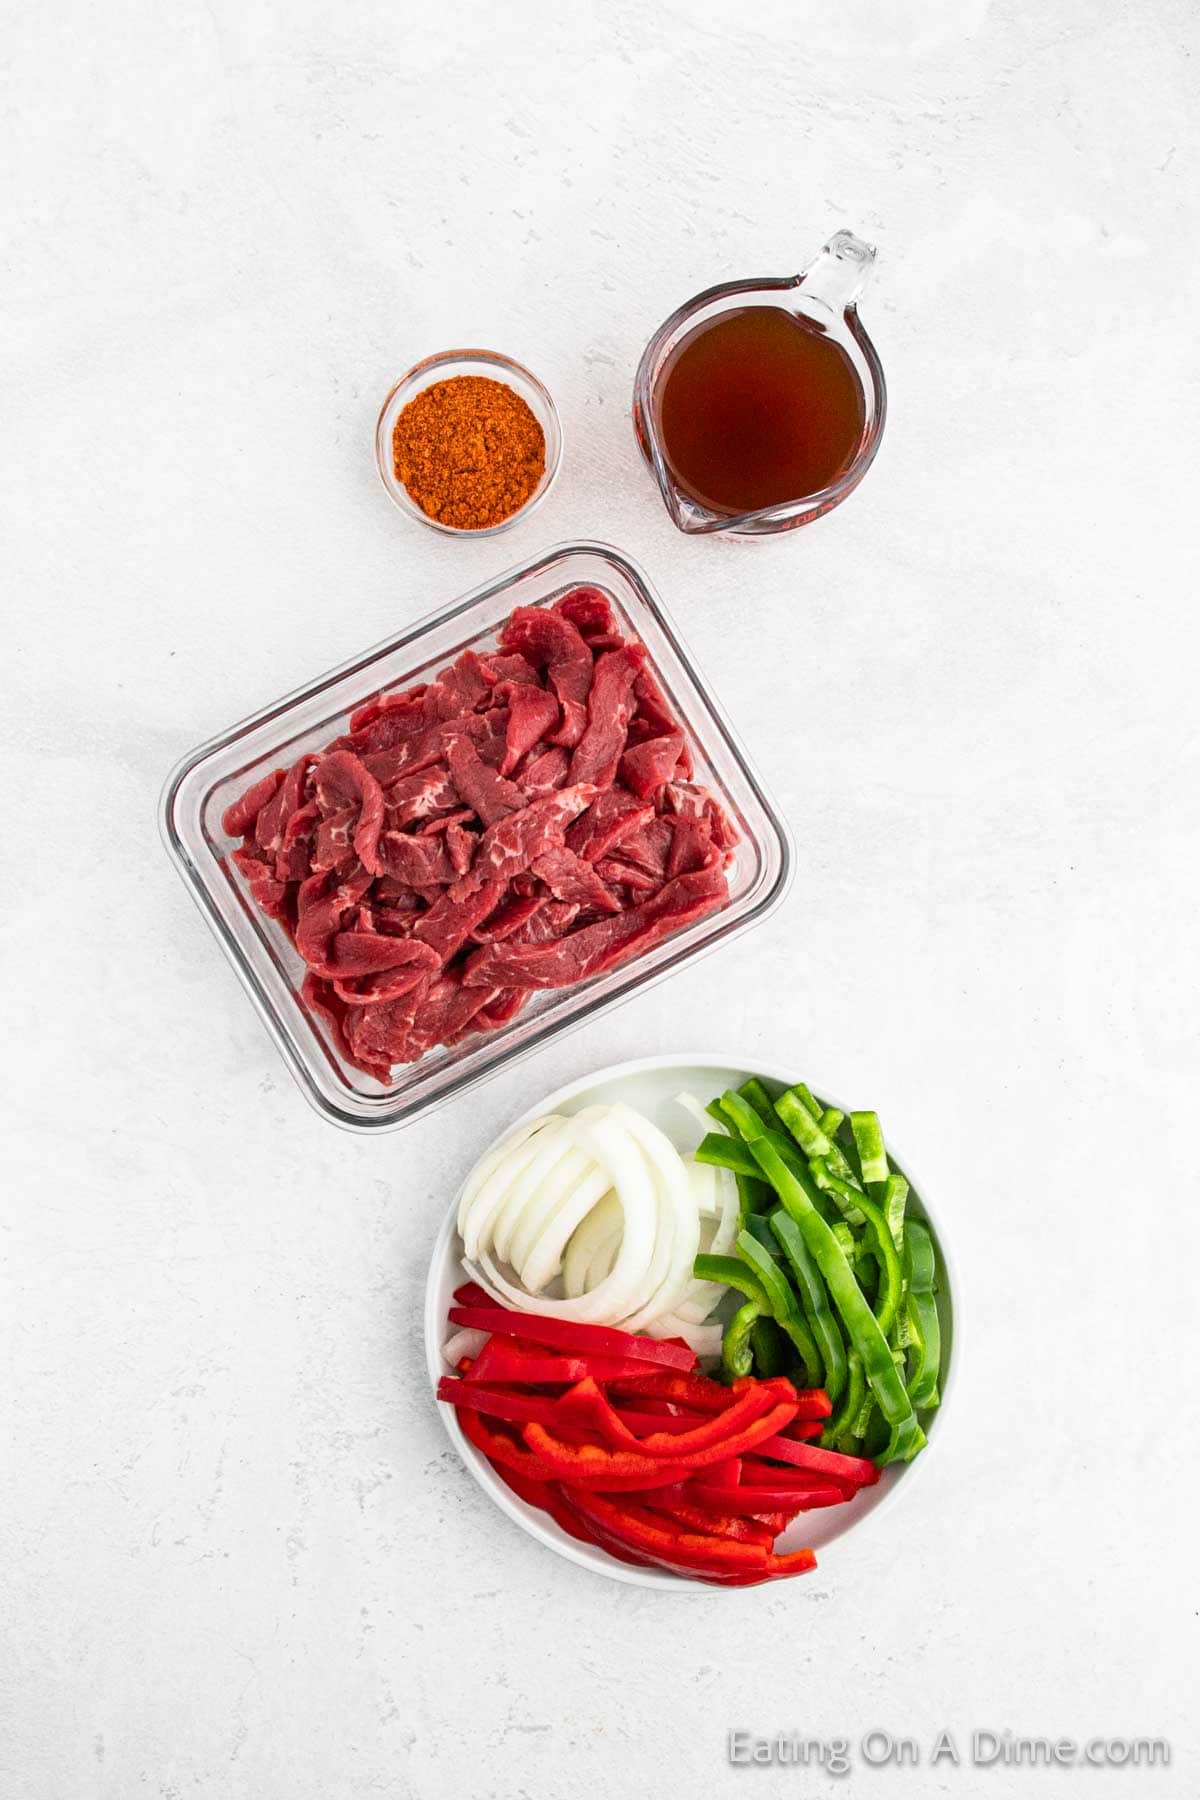 Ingredients - Strips of steak, taco seasoning, bell peppers and onions with a bowl of beef broth